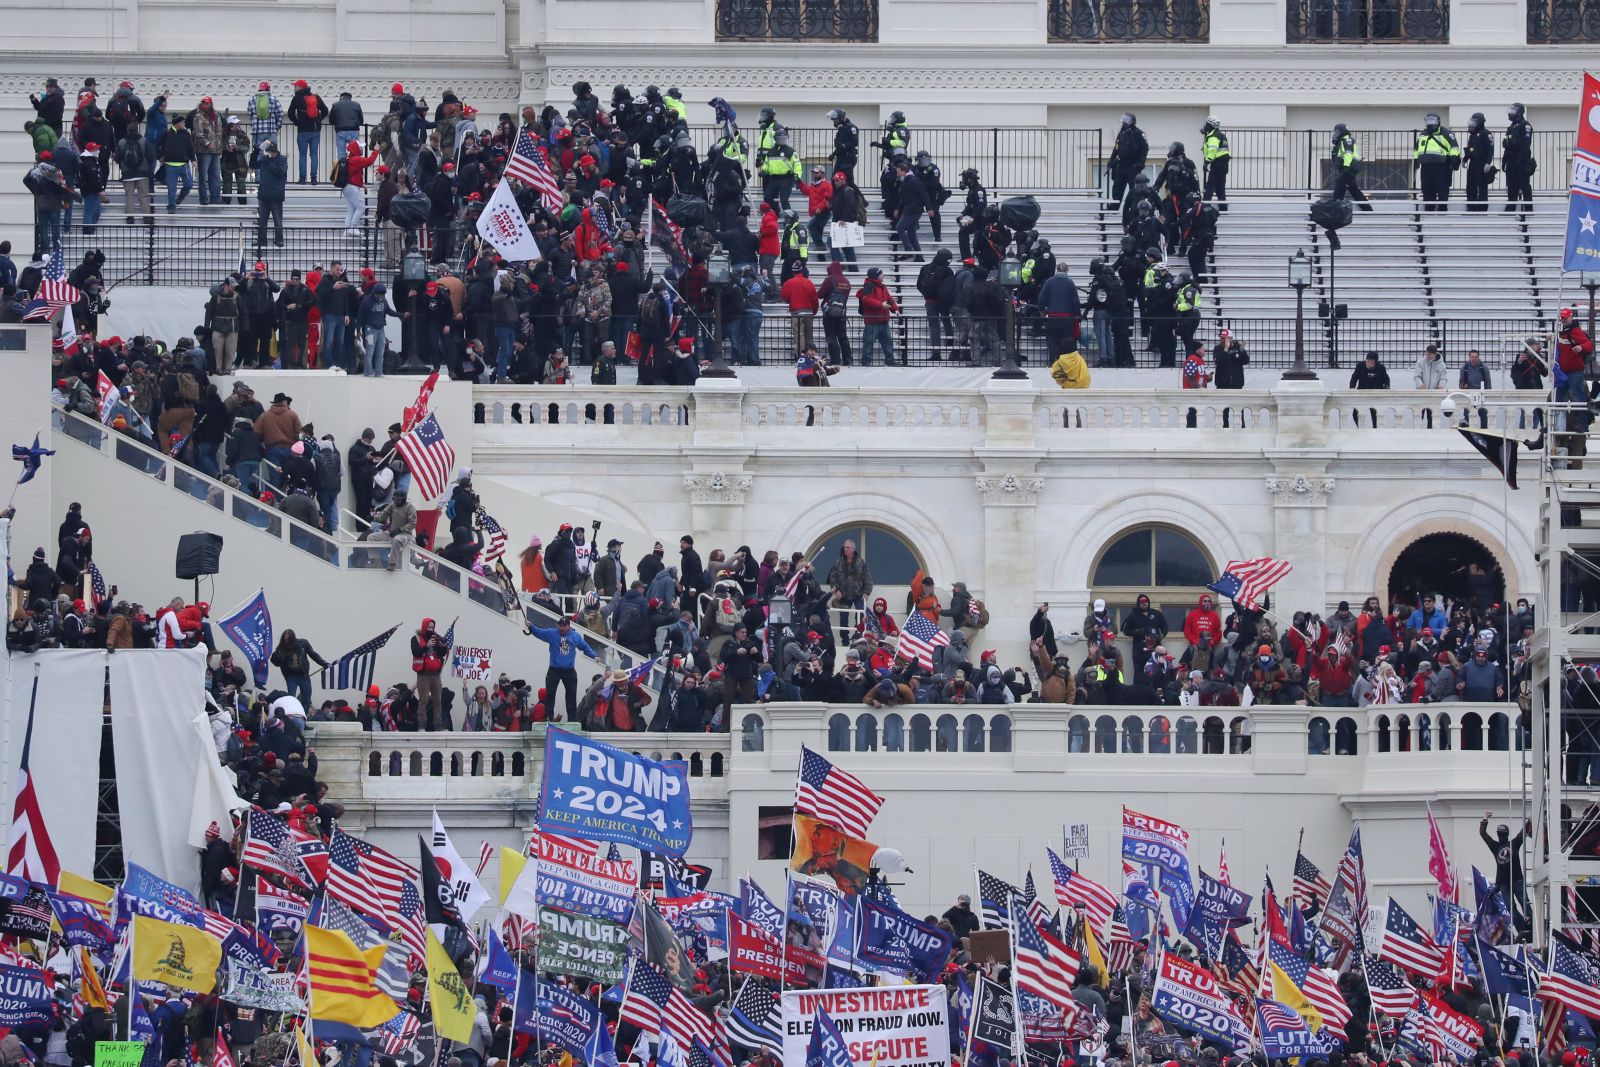 epa09664290 (19/24) (FILE) - Pro-Trump protesters occupy the grounds of the West Front of the US Capitol, including the inaugural stage and viewing stands, in Washington, DC, USA, 06 January 2021 (reissued 03 January 2021). Following the November 2020 US presidential election, a tone set by supporters of defeated US President Donald Trump escalated further. Trump, who was refusing to concede the victory of Joe Biden, claiming voter fraud and rigged elections, told supporters and white nationalist extreme-right group Proud Boys to respectively 'Stop the Steal' and to 'stand back and stand by'. His social media accounts were suspended and the alt-right platform Parler gained in user numbers. 
 
On 06 January 2021, incumbent US vice president Pence was due to certify the Electoral College votes before Congress, the last step in the process before President-elect Biden was to be sworn in. In the morning, pro-Trump protesters had gathered for the so-called Save America March. Soon after Trump finished his speech at the Ellipse, the crowd marched to the Capitol. The attack had begun. 
 
Rioters broke into the Capitol building where the joint Congress session was being held. Lawmakers barricaded themselves inside the chambers and donned tear gas masks while rioters vandalized the building, some even occupying offices such as House Speaker Pelosi's. Eventually in the evening the building was cleared from insurrectionists, and the Congress chambers reconvened their session, confirming Joe Biden as the winner of the 2020 US presidential election. 

In the aftermath, more than 600 people were charged with federal crimes in connection to the insurgency, and close Trump aides such as Steve Bannon, Mark Meadows and Roger Stone were subpoenaed by the House select committee investigating the attack. Trump himself was acquitted by the Senate in his second impeachment trial, this time for "inciting an insurrection".  EPA/MICHAEL REYNOLDS  ATTENTION: This Image is part of a PHOTO